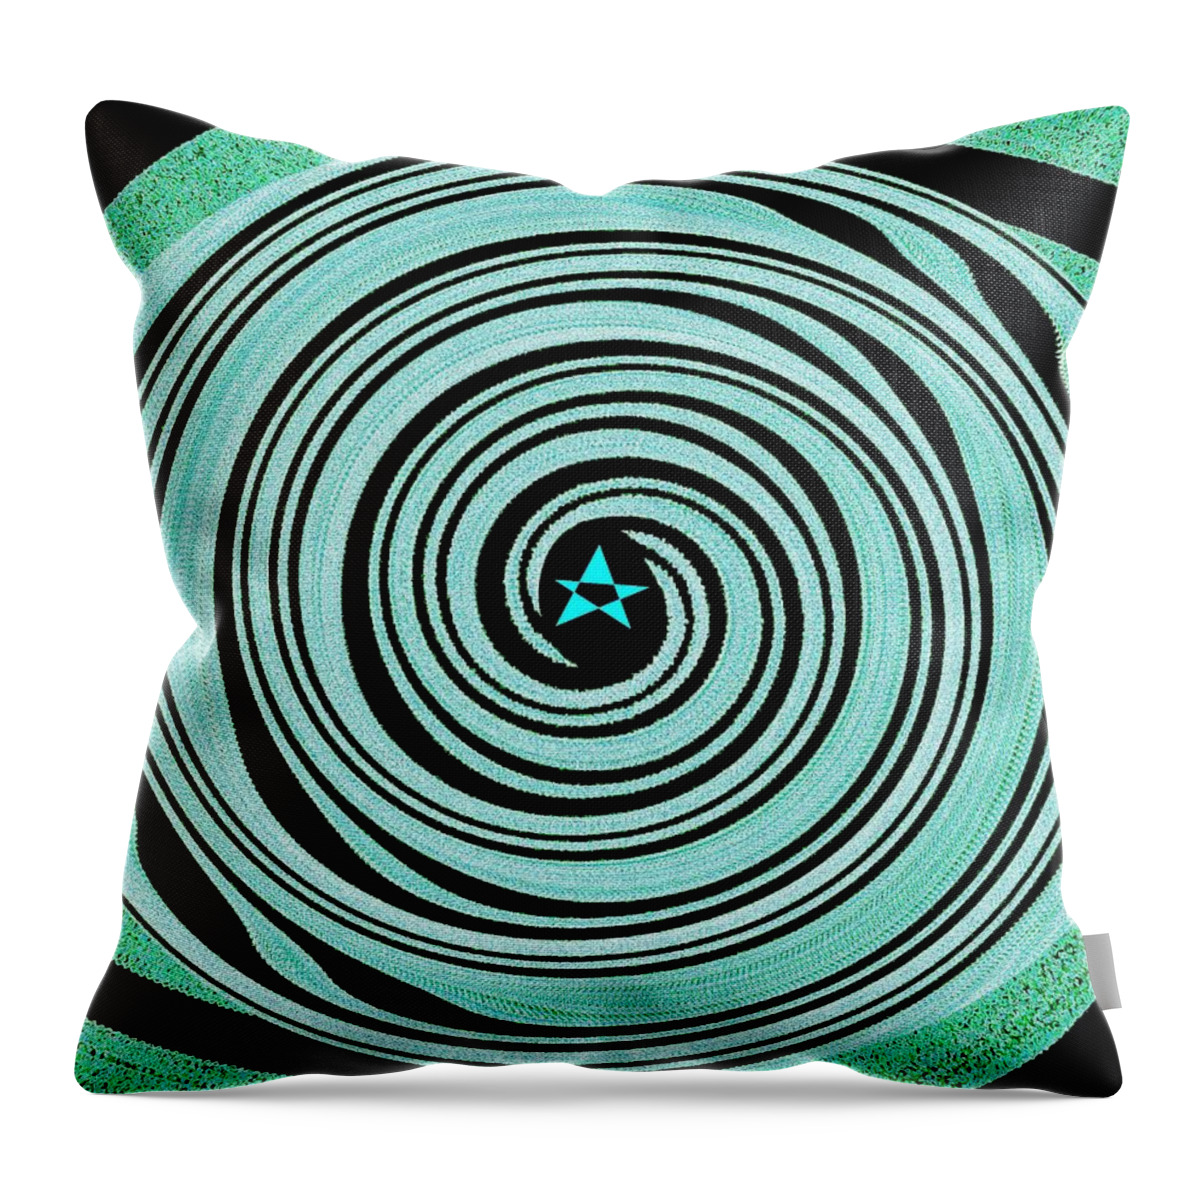 Paparazzi Throw Pillow featuring the digital art Paparazzi by Will Borden